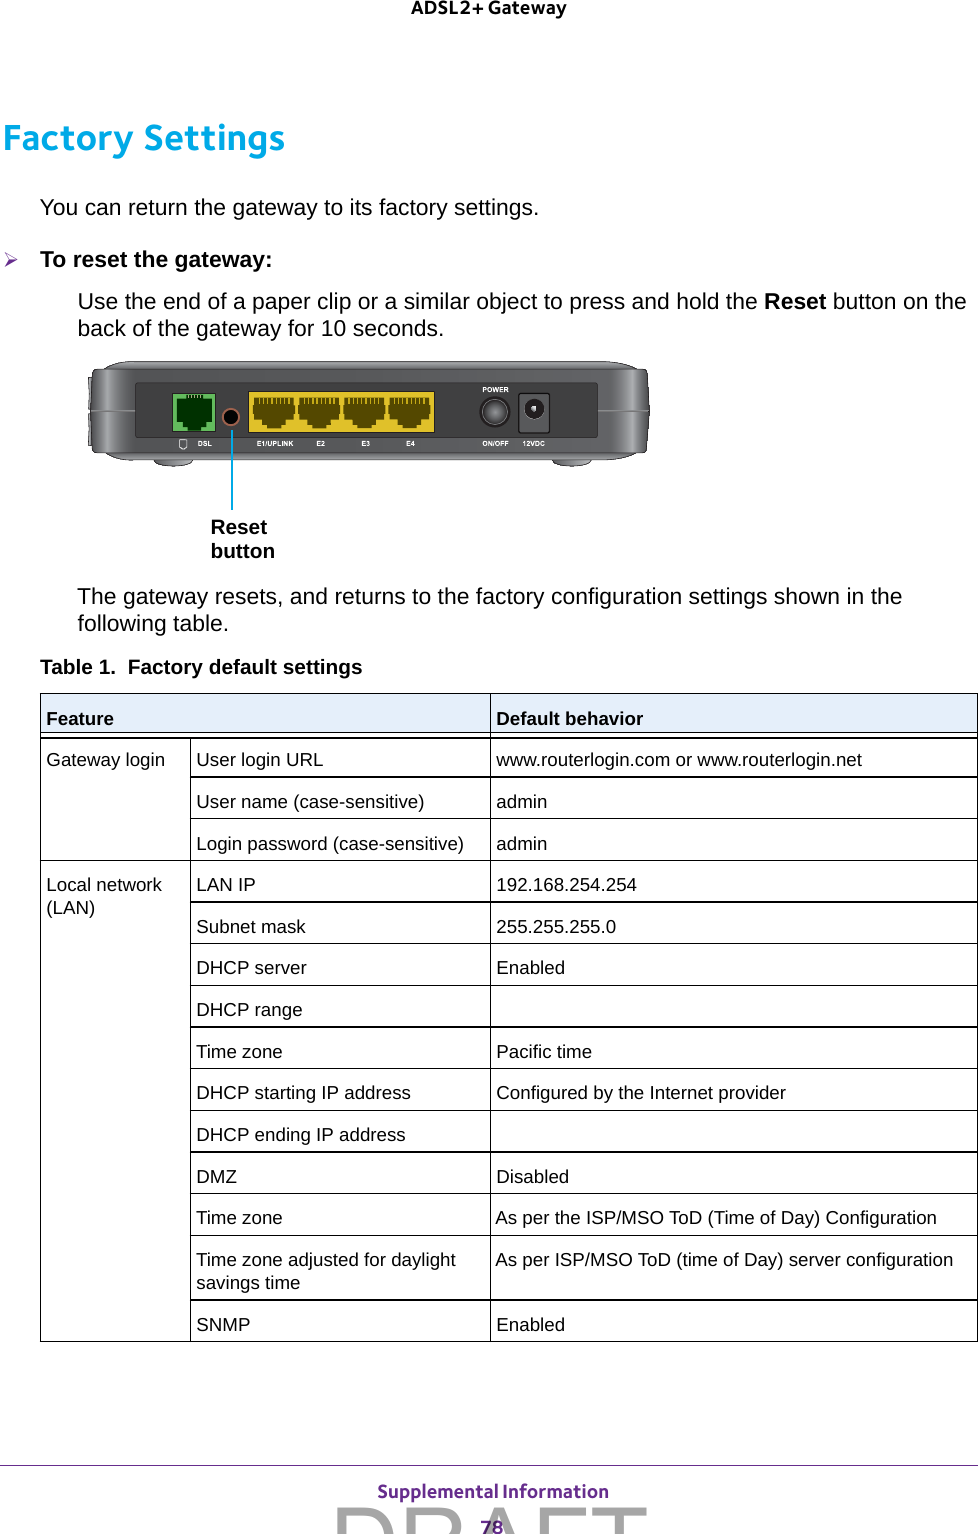  Supplemental Information78ADSL2+ Gateway Factory SettingsYou can return the gateway to its factory settings. To reset the gateway:Use the end of a paper clip or a similar object to press and hold the Reset button on the back of the gateway for 10 seconds. ResetbuttonThe gateway resets, and returns to the factory configuration settings shown in the following table.Table 1.  Factory default settings  Feature Default behaviorGateway login User login URL www.routerlogin.com or www.routerlogin.netUser name (case-sensitive) admin Login password (case-sensitive) adminLocal network (LAN) LAN IP 192.168.254.254Subnet mask 255.255.255.0DHCP server EnabledDHCP rangeTime zone Pacific timeDHCP starting IP address Configured by the Internet providerDHCP ending IP addressDMZ DisabledTime zone As per the ISP/MSO ToD (Time of Day) ConfigurationTime zone adjusted for daylight savings time As per ISP/MSO ToD (time of Day) server configurationSNMP EnabledDRAFT